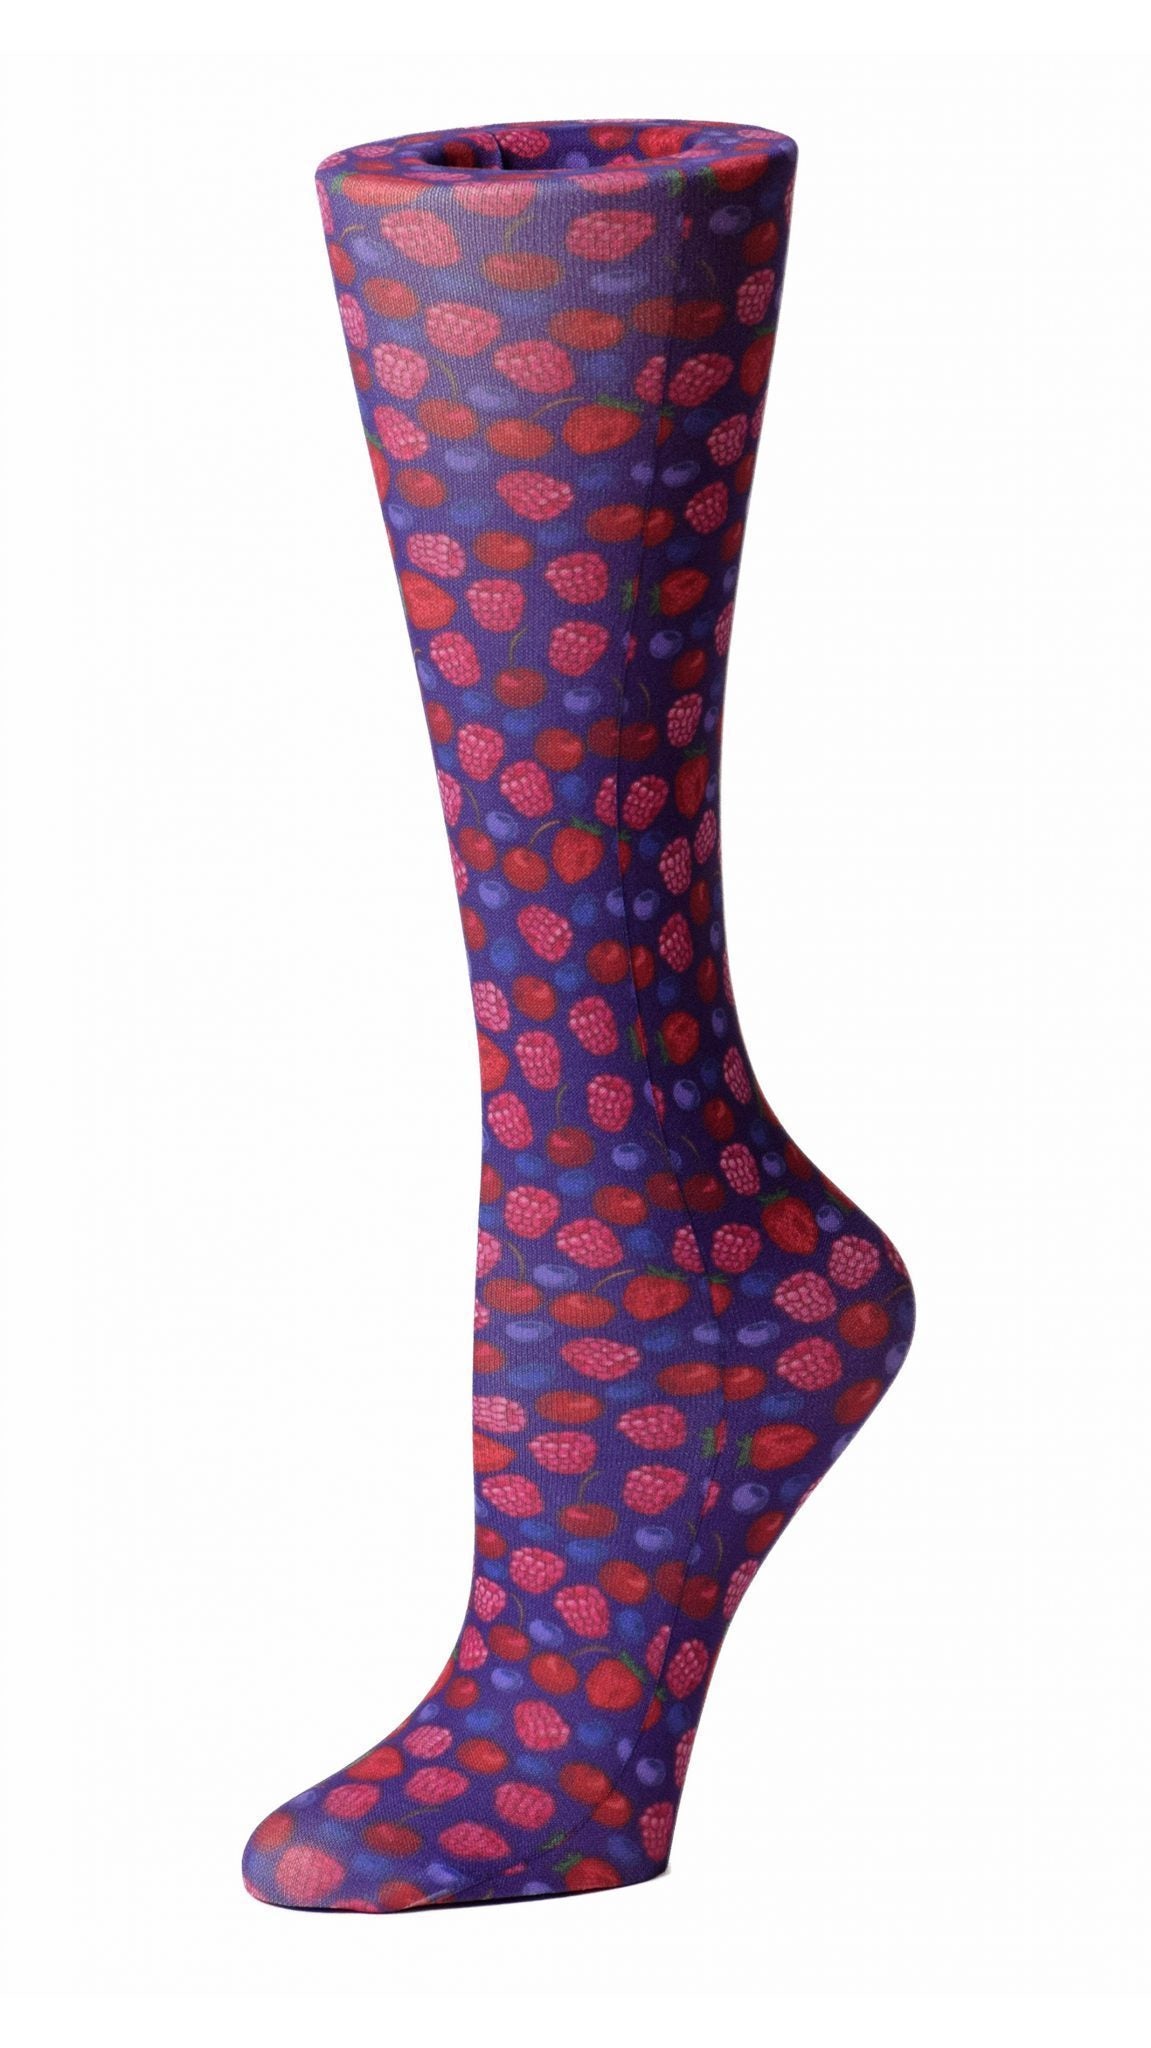 Cutieful Moderate Compression Socks 10-18 MMhg Wide Calf Knit Print Pattern Berries at Parker's Clothing and Shoes.